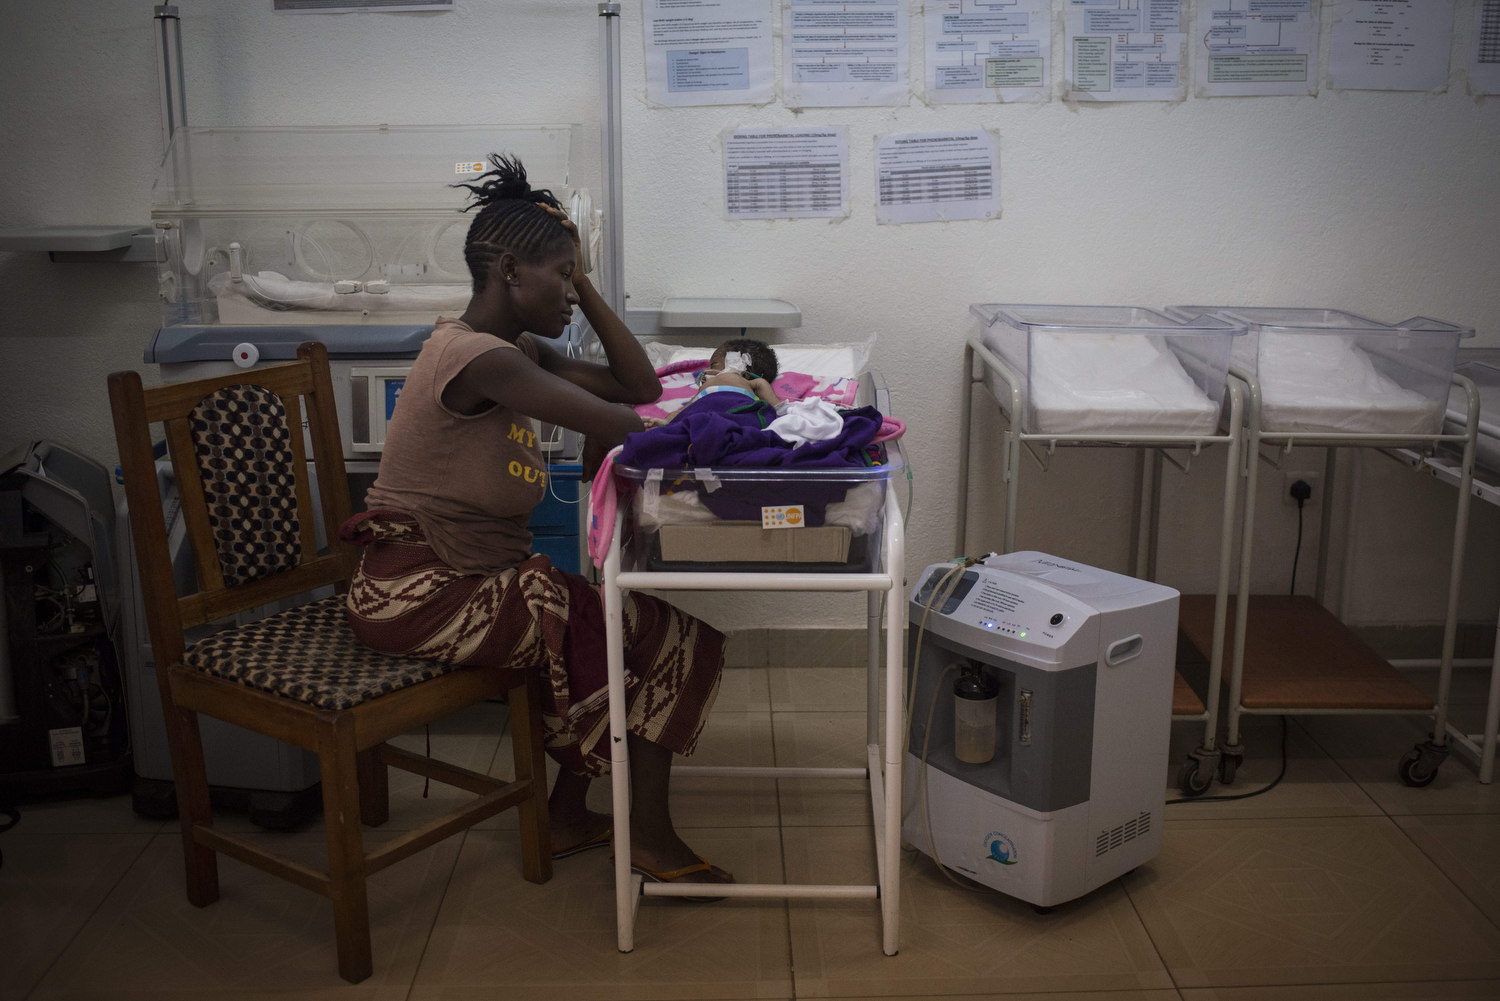  Kema watches her baby boy in the NICU ward on November 12th, 2015 three days after giving birth to the baby at Kenema Goverment Hospital in Kenema, Sierra Leone. The baby died the next day, he was five days old.  